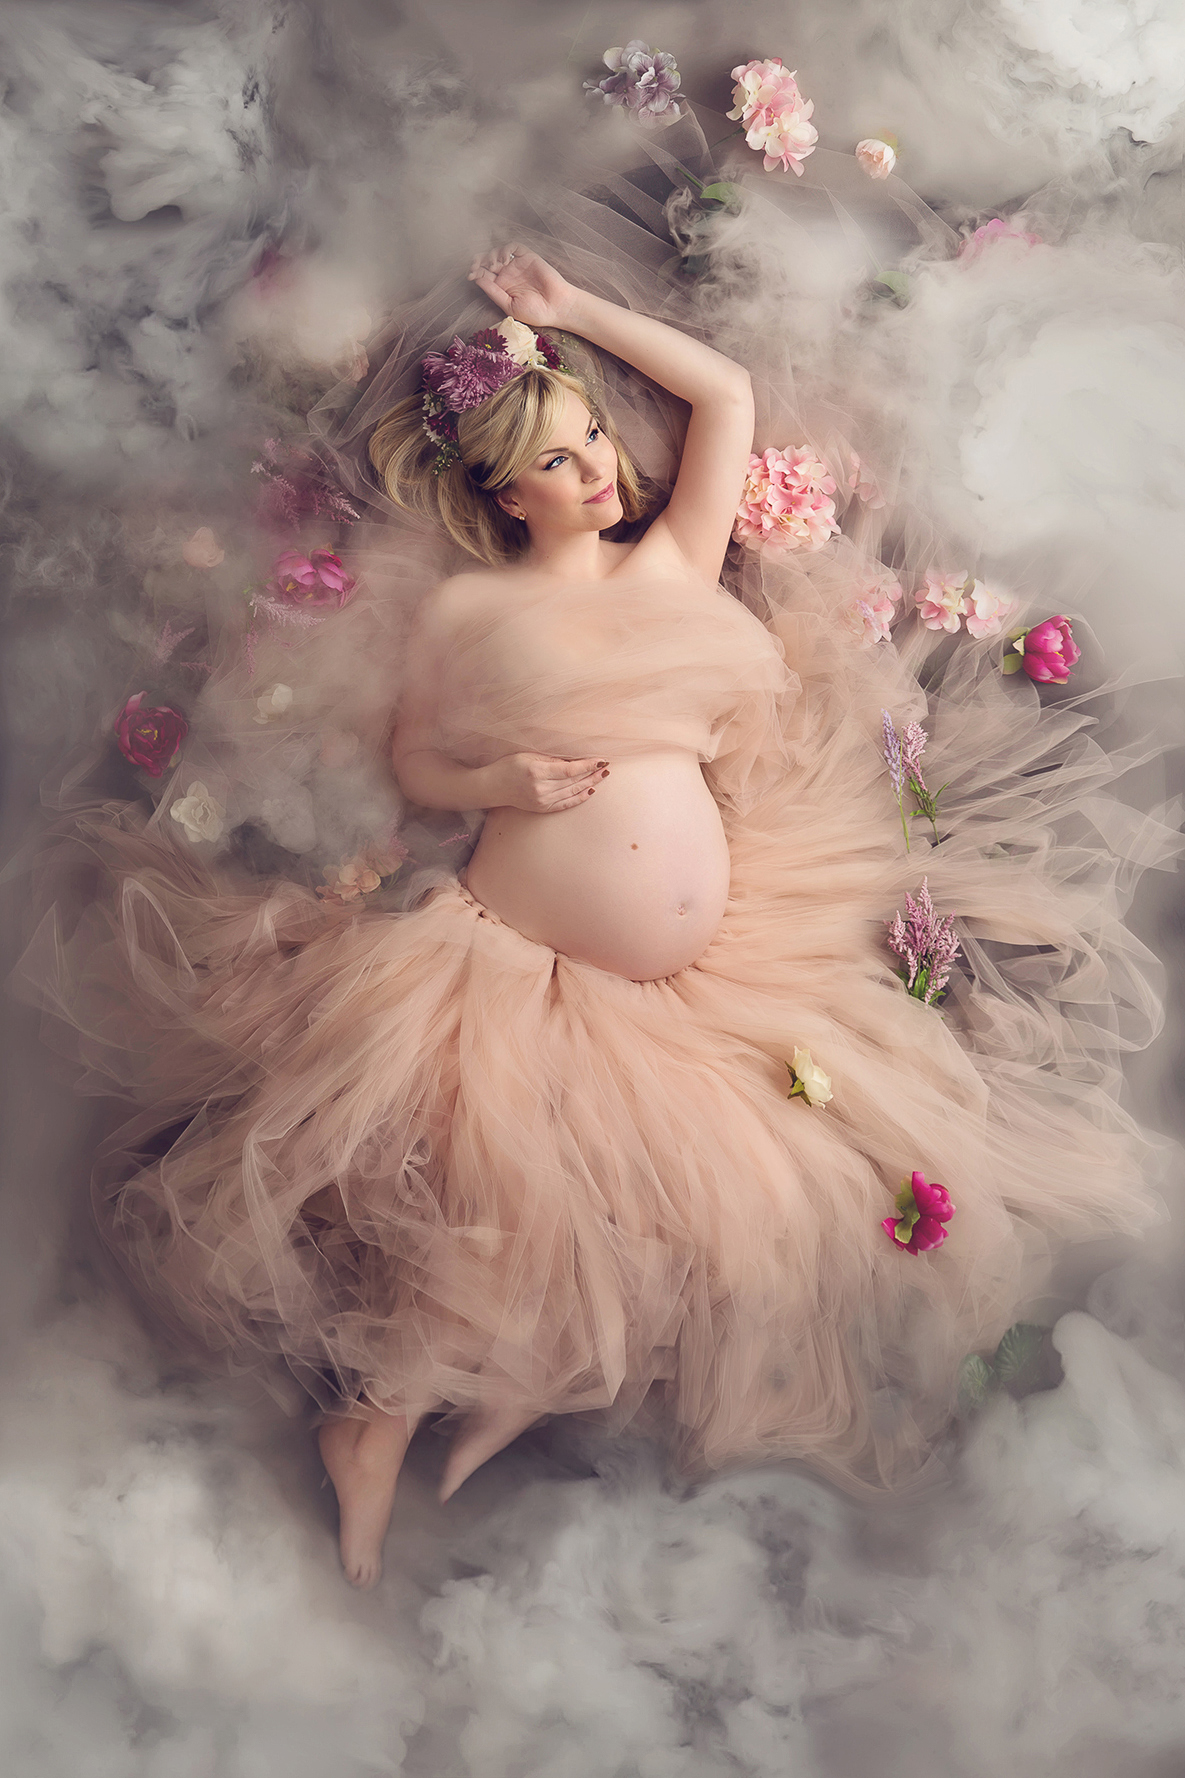 Studio maternity dry ice portrait from above, with the pregnant mother lying down, her light pink dress spread around her, looking off to the distance, surrounded by fog and mist, her expectant belly exposed. Image by Helga Himer Photography, Sudbury, Ontario.